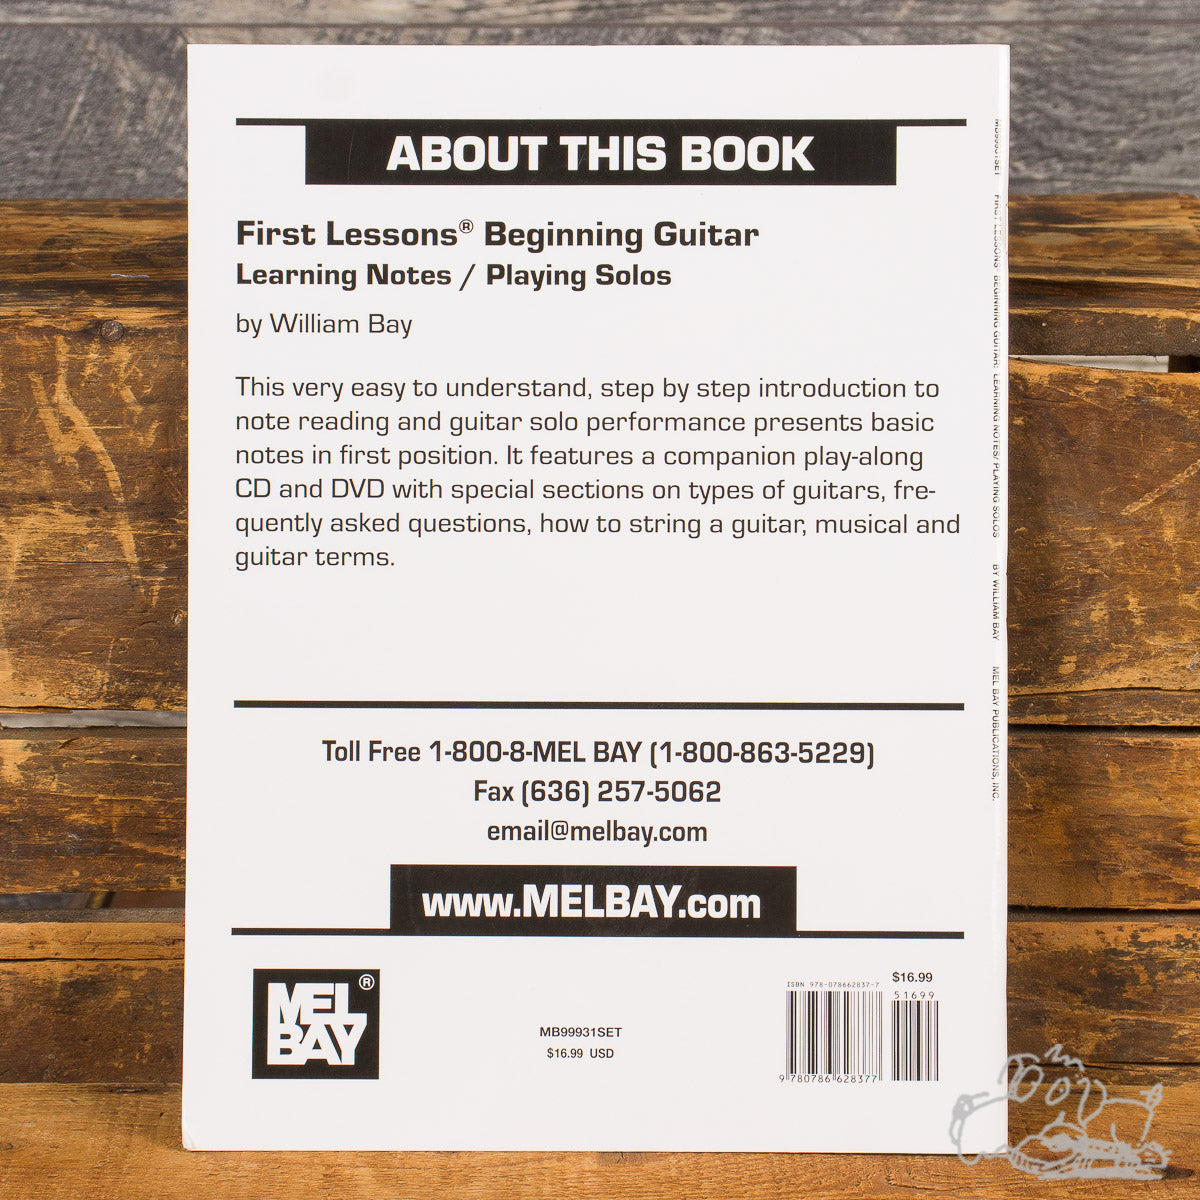 Mel Bay's First Lessons Beginning Guitar by William Bay - CD & DVD Included!